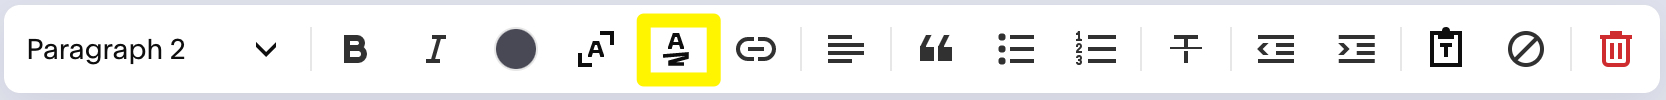 Text_highlit_icon_in_the_Squarespace_text_toolbar_letter_a_with_a_squiggle_under_it.png